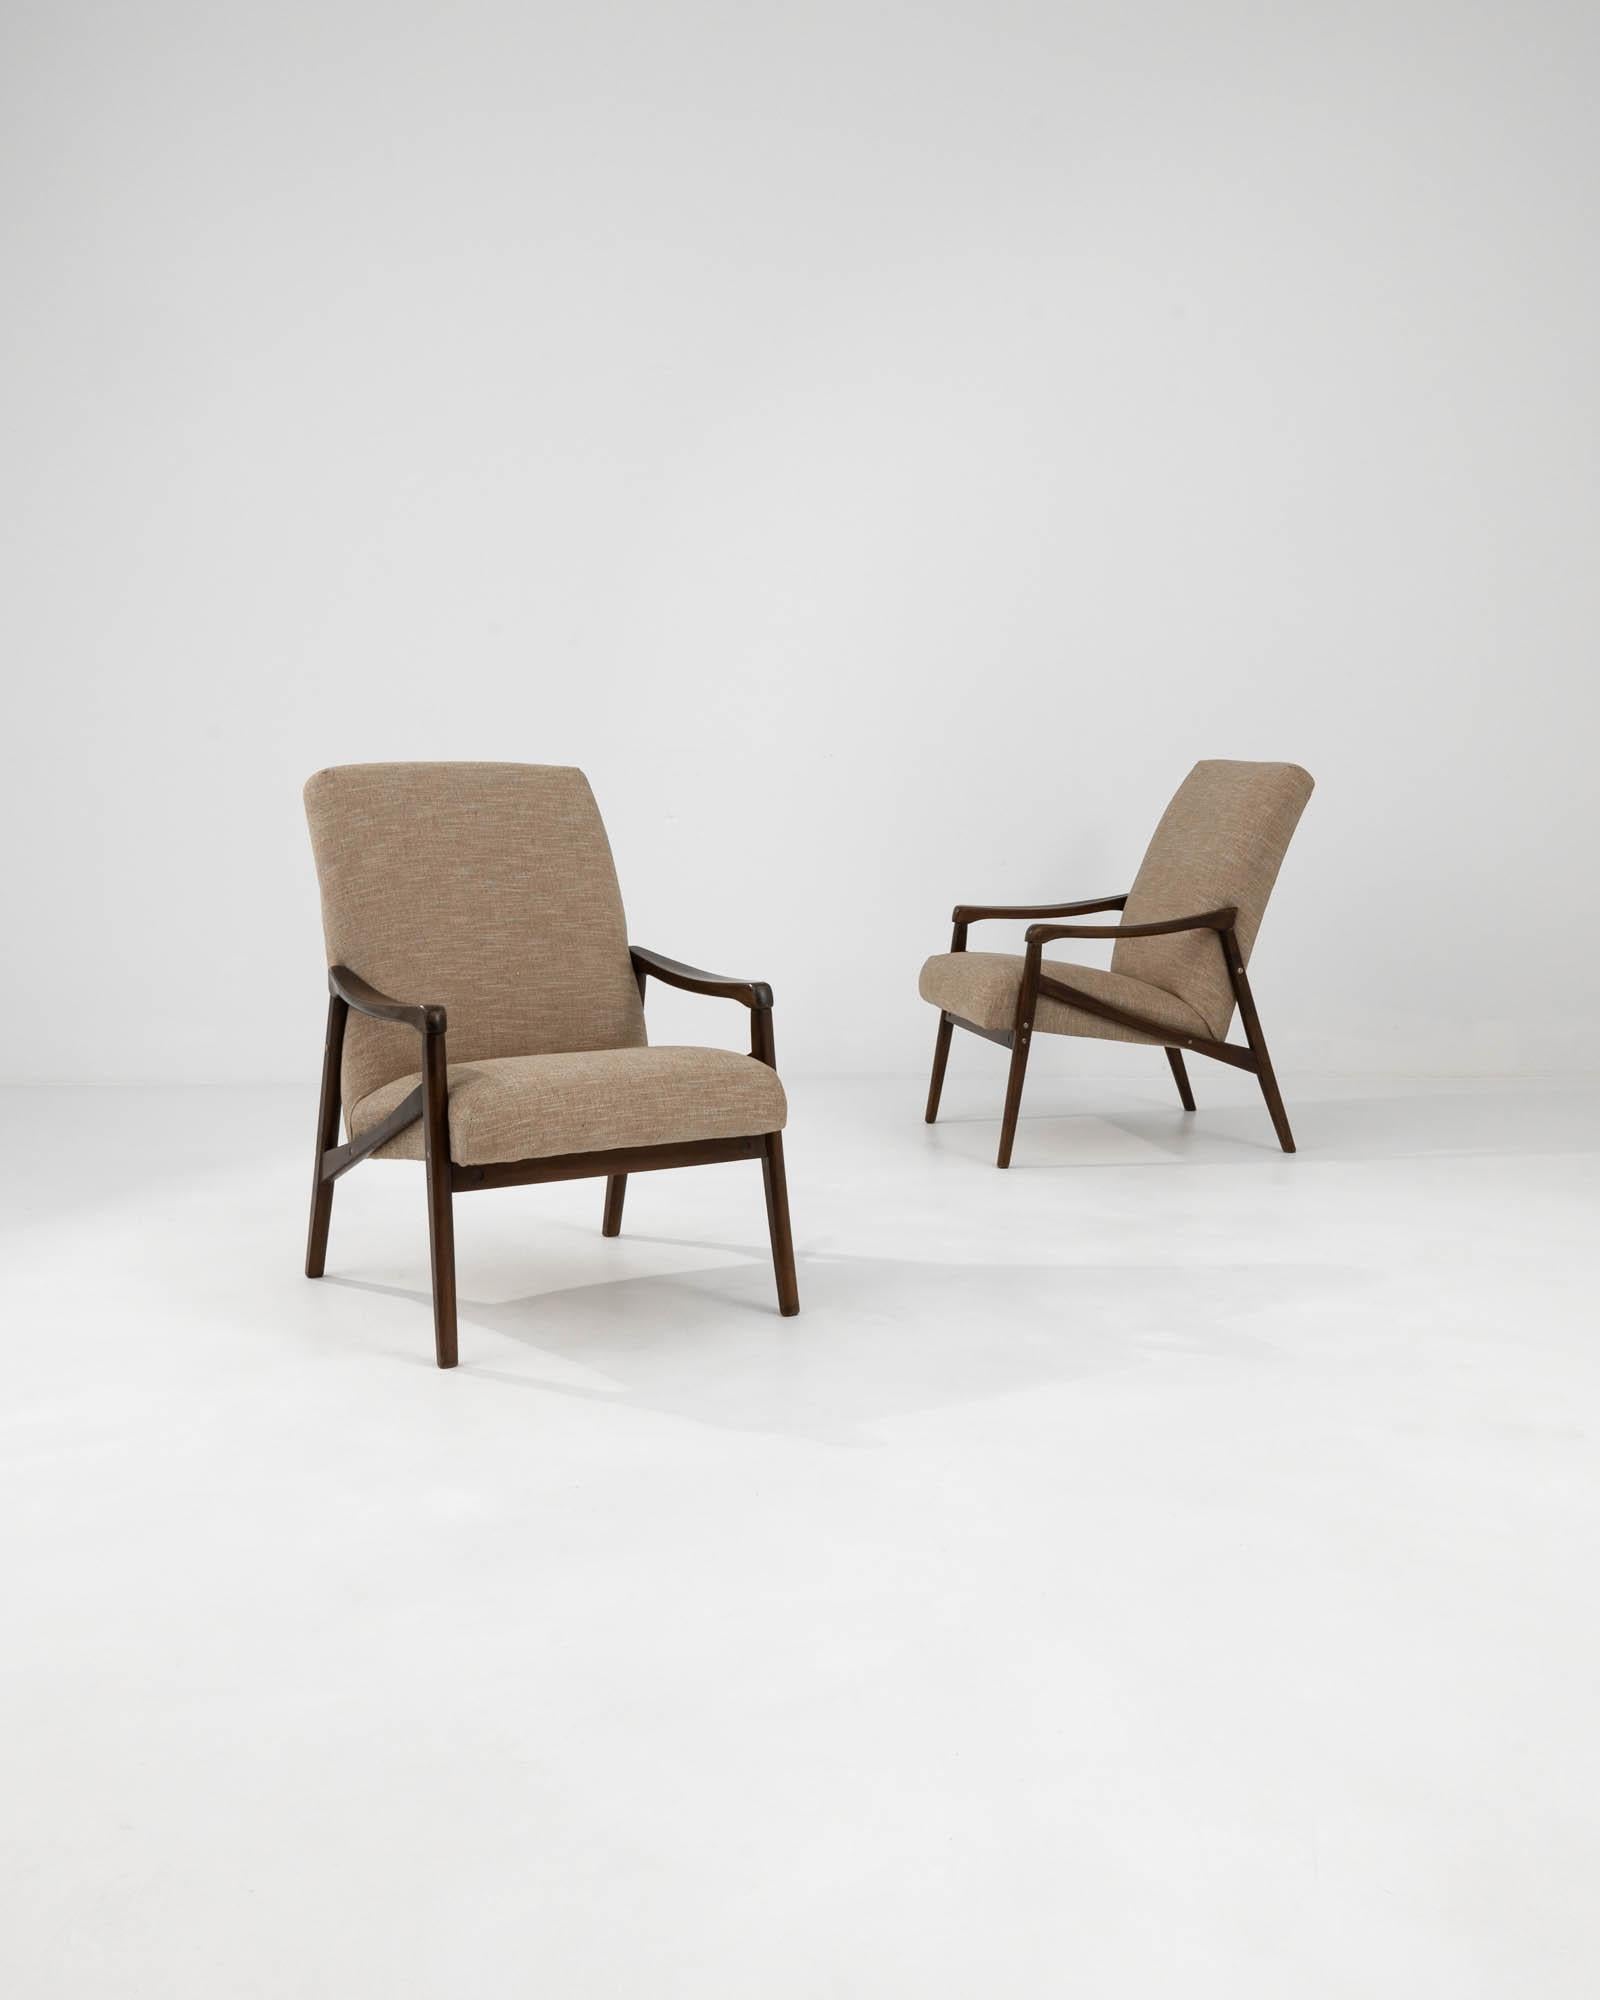 Introducing the 1960s Czech Upholstered Armchairs by Jiri Jiroutek, a pair that encapsulates the spirit of mid-century modern design with a hint of Eastern European charm. The clean, angular lines of the dark wooden frame are a nod to the minimalist